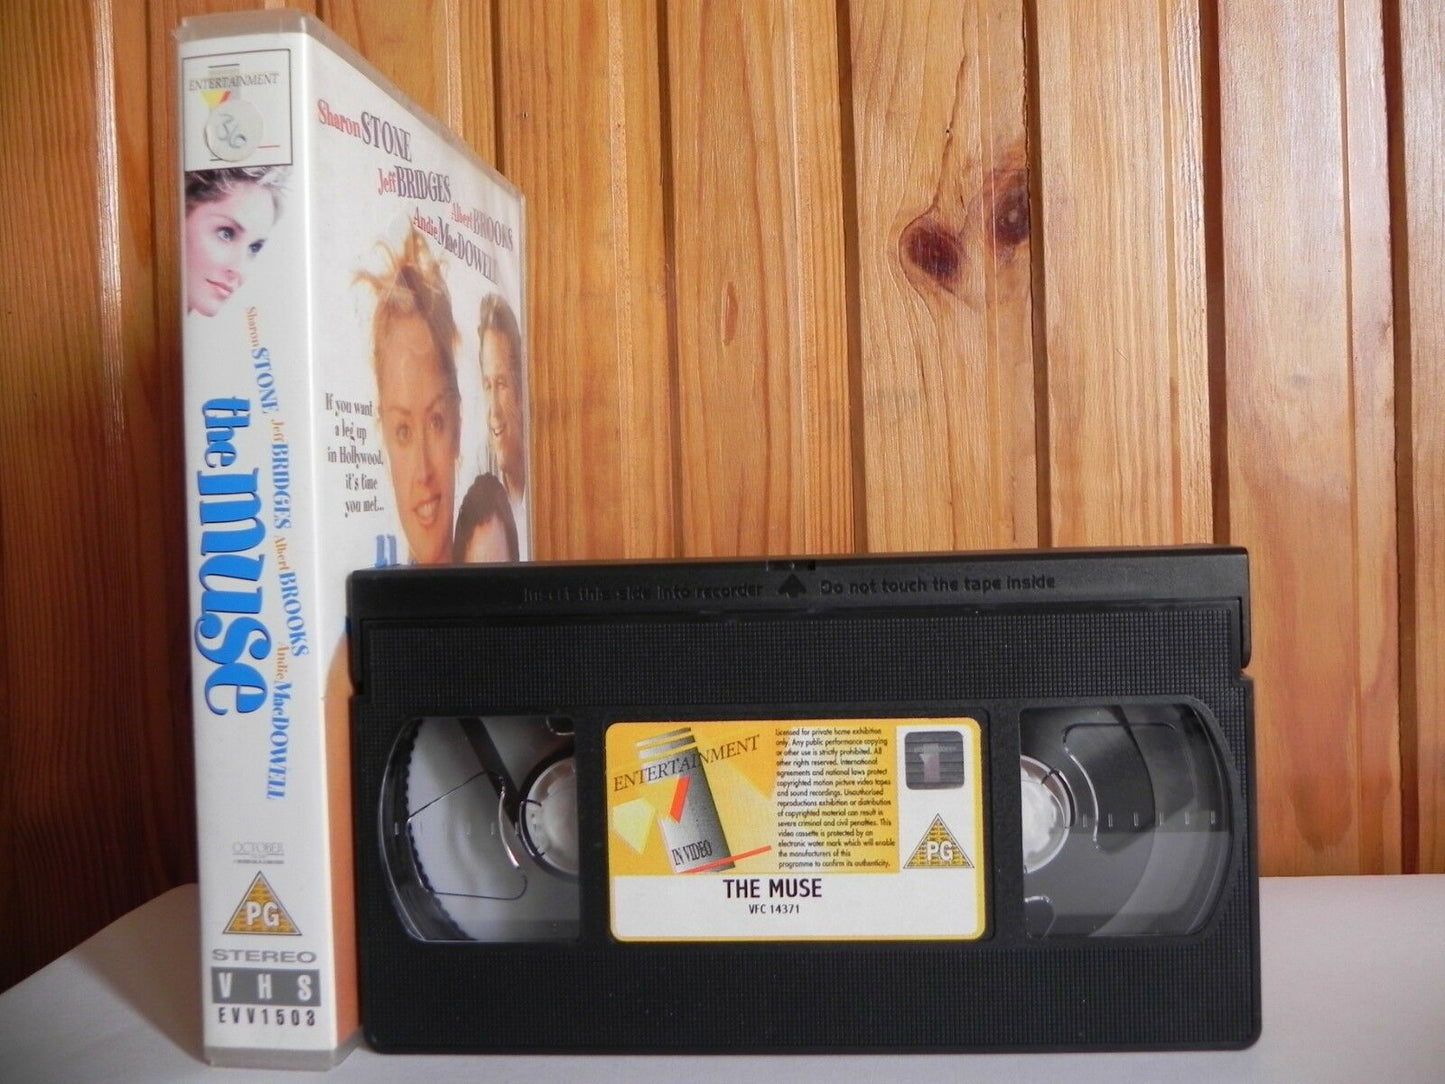 The Muse - Large Box - Entertainment In Video - Comedy - Sharon Stone - Pal VHS-